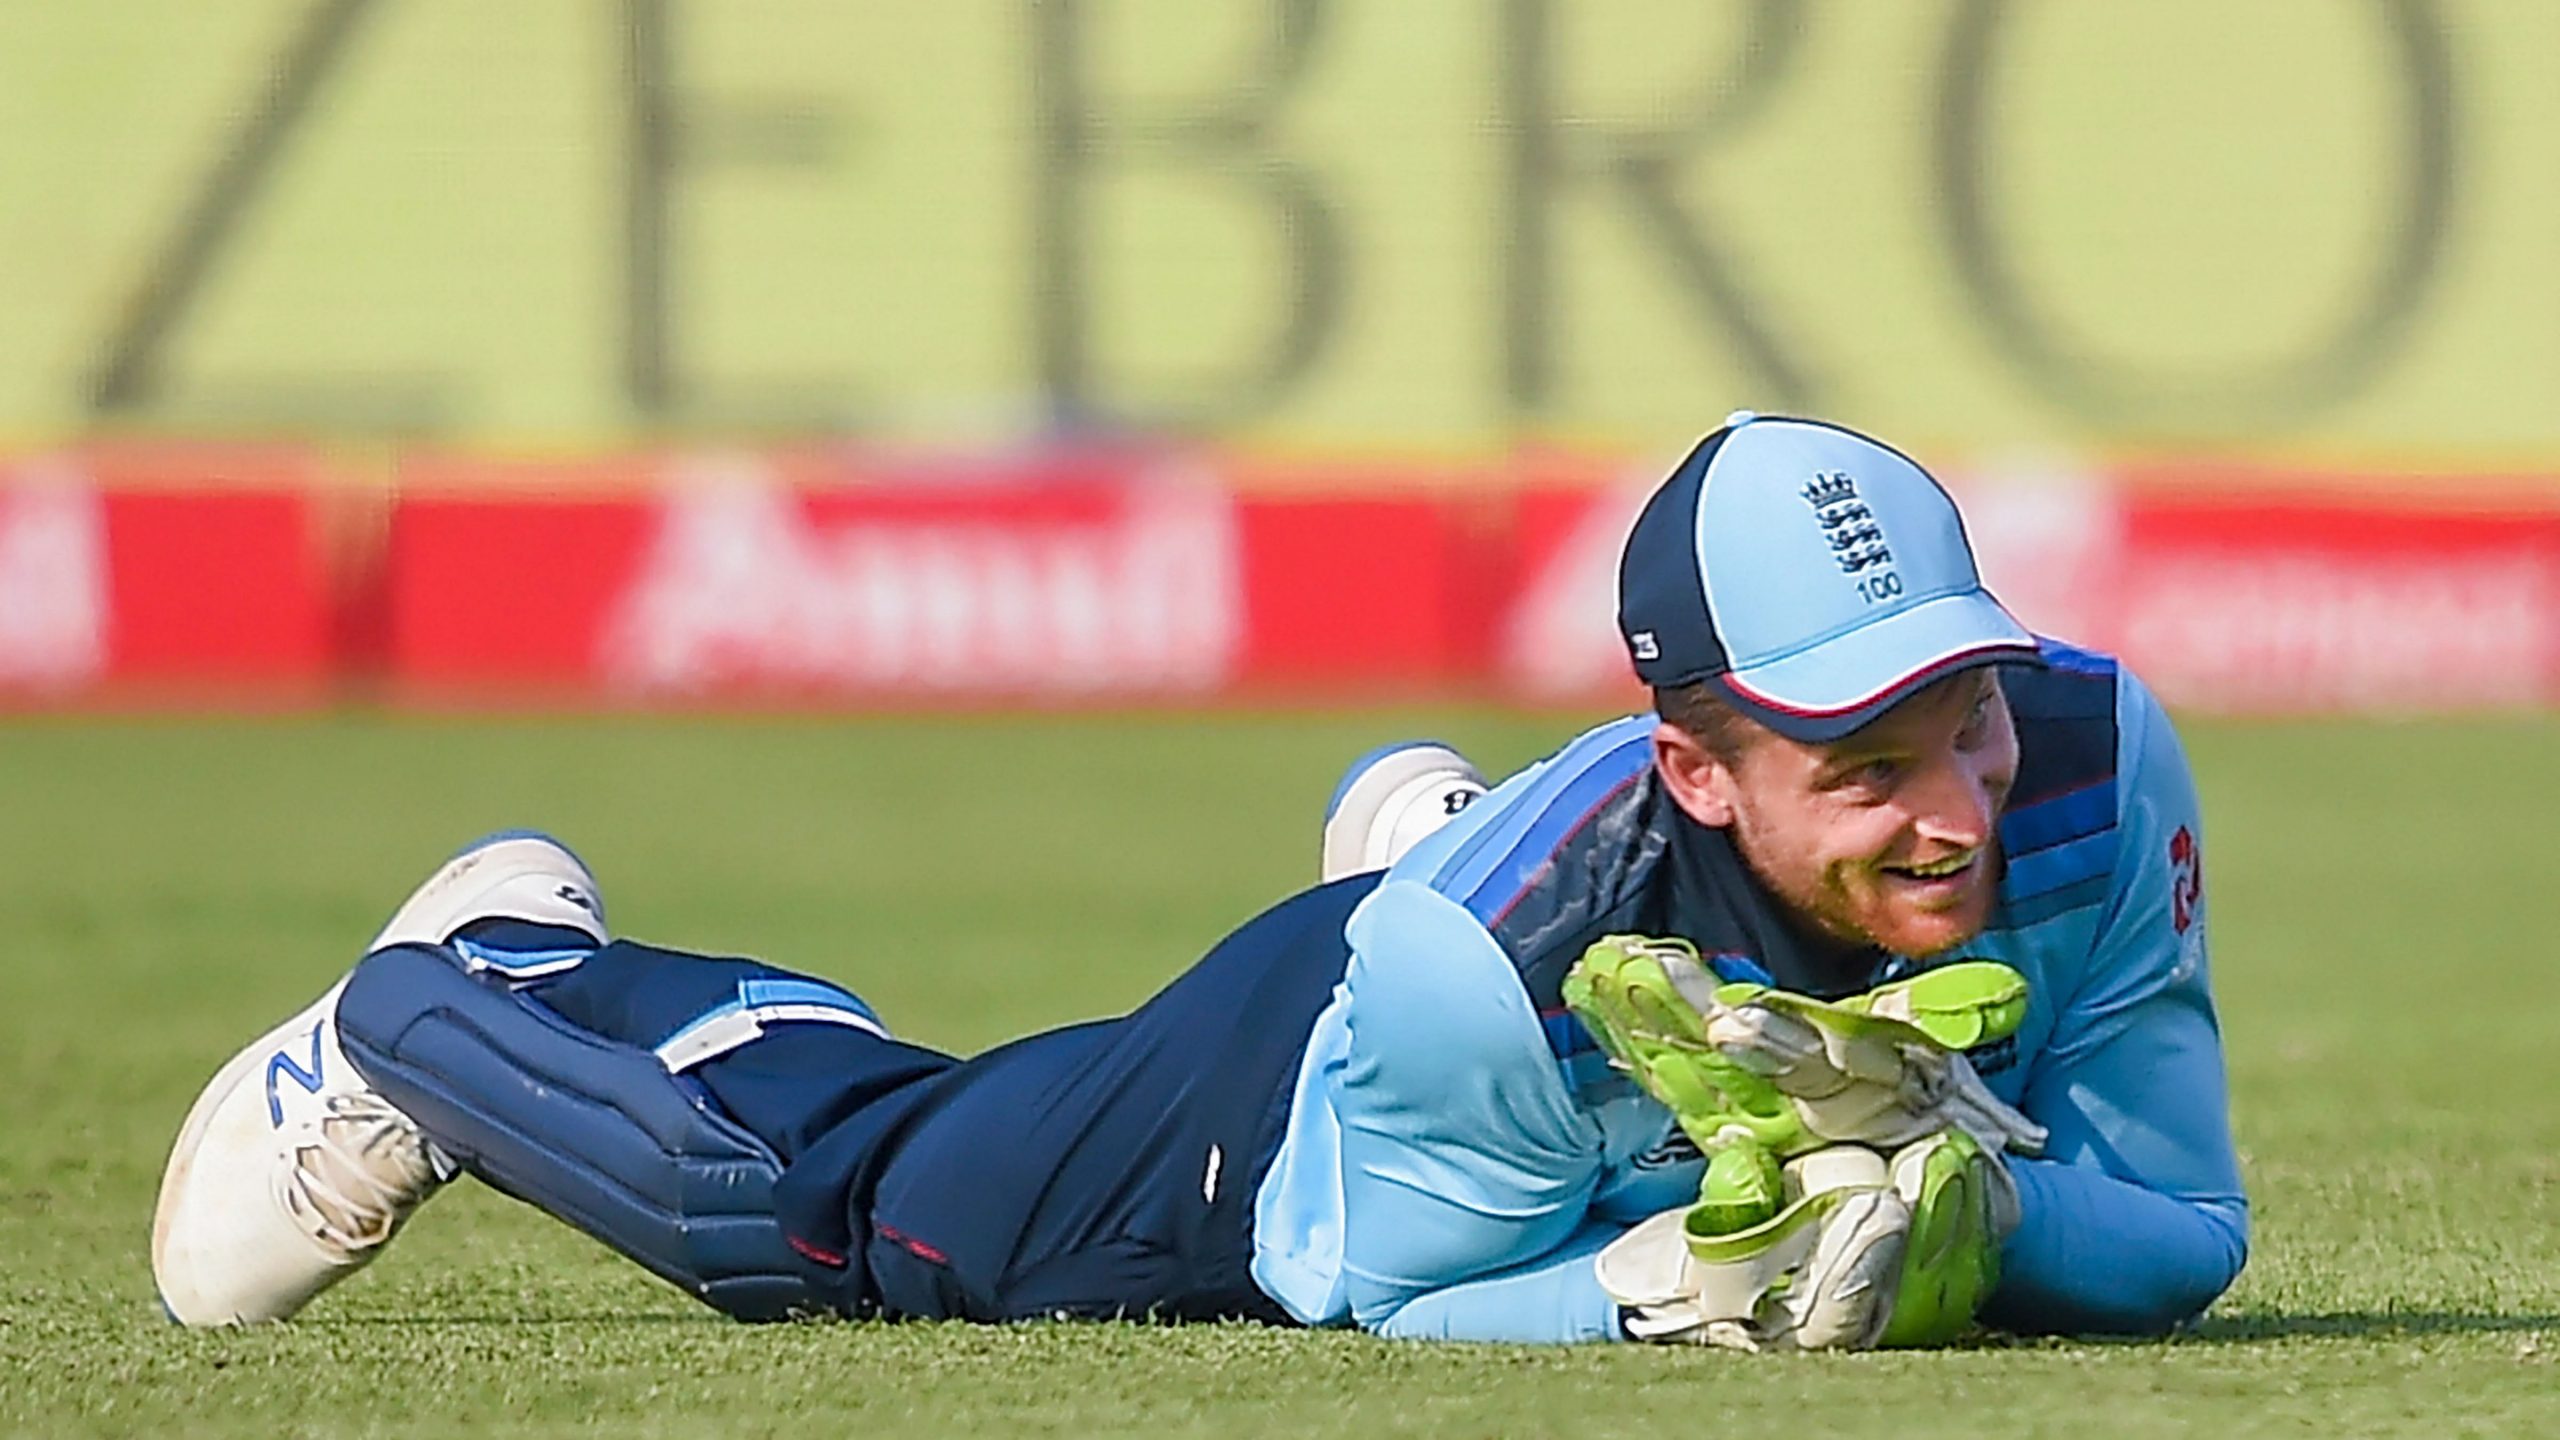 England will continue to play this way, won’t panic: Captain Buttler after loss to India